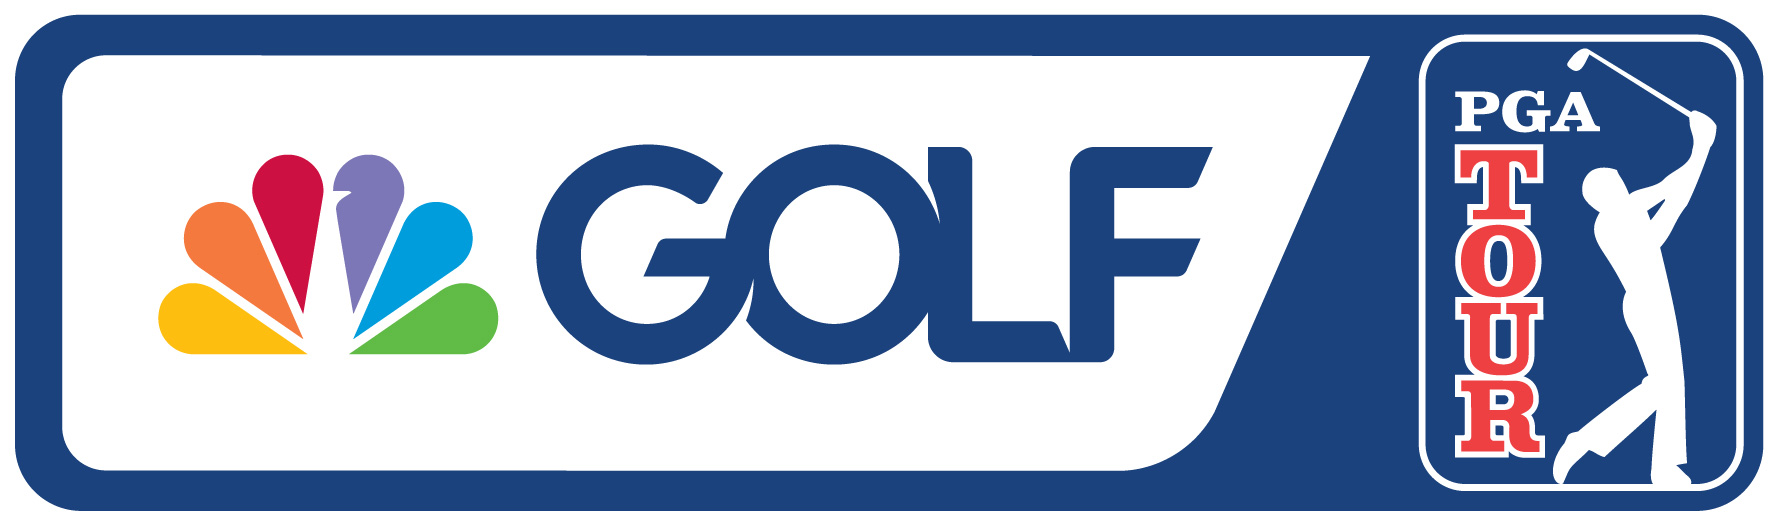 60+ HOURS OF GOLF TOURNAMENT COVERAGE ACROSS FIVE EVENTS PRESENTED ON GOLF CHANNEL AND PEACOCK THIS WEEK